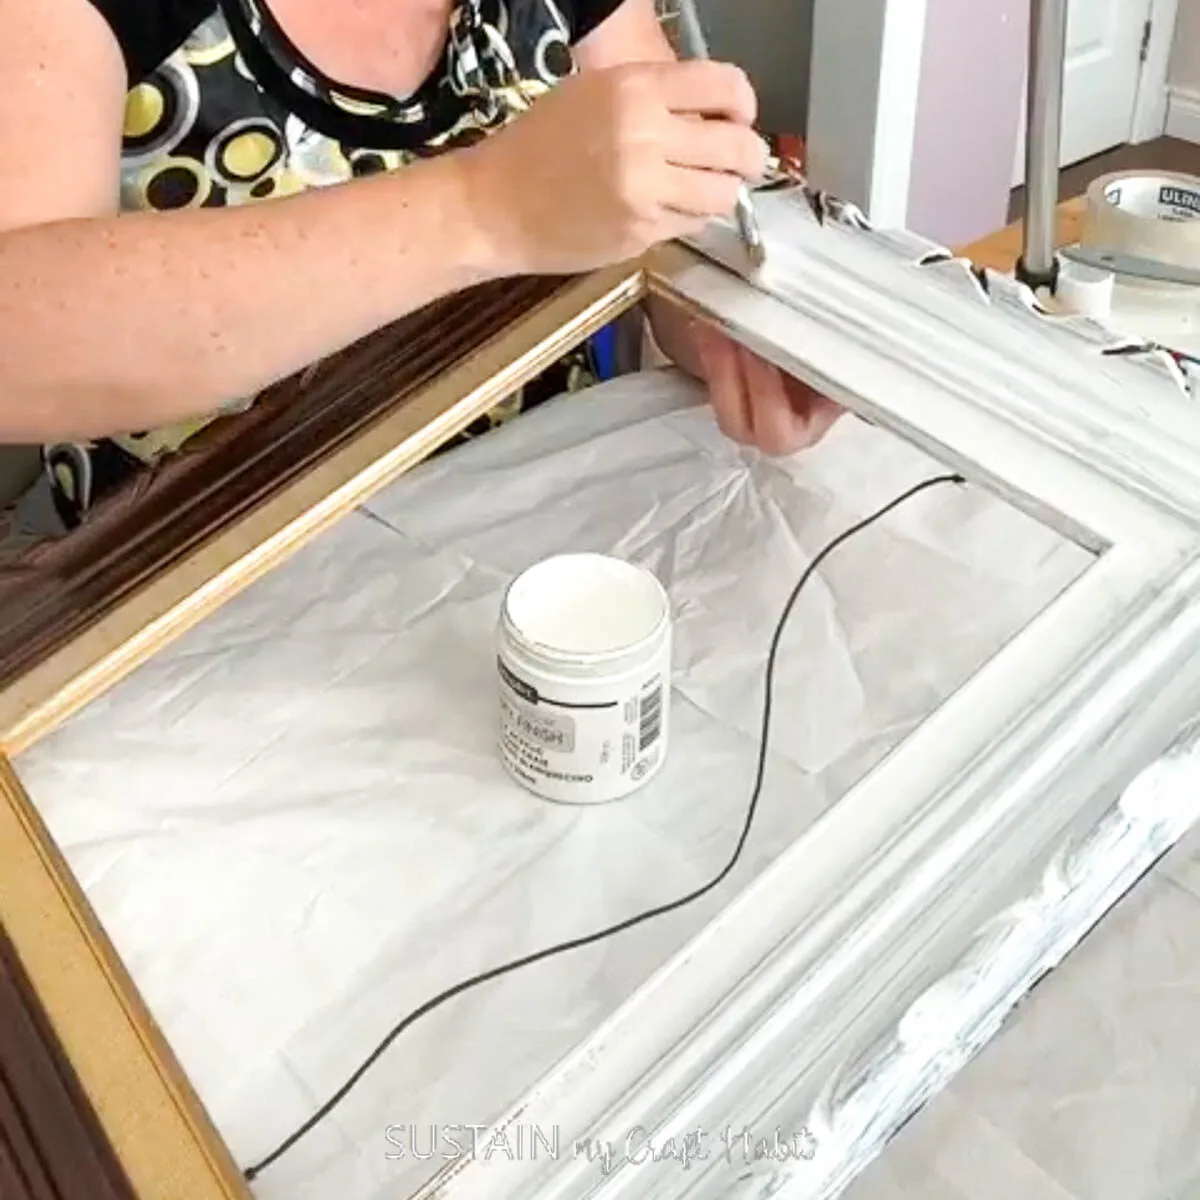 Painting a wood frame.